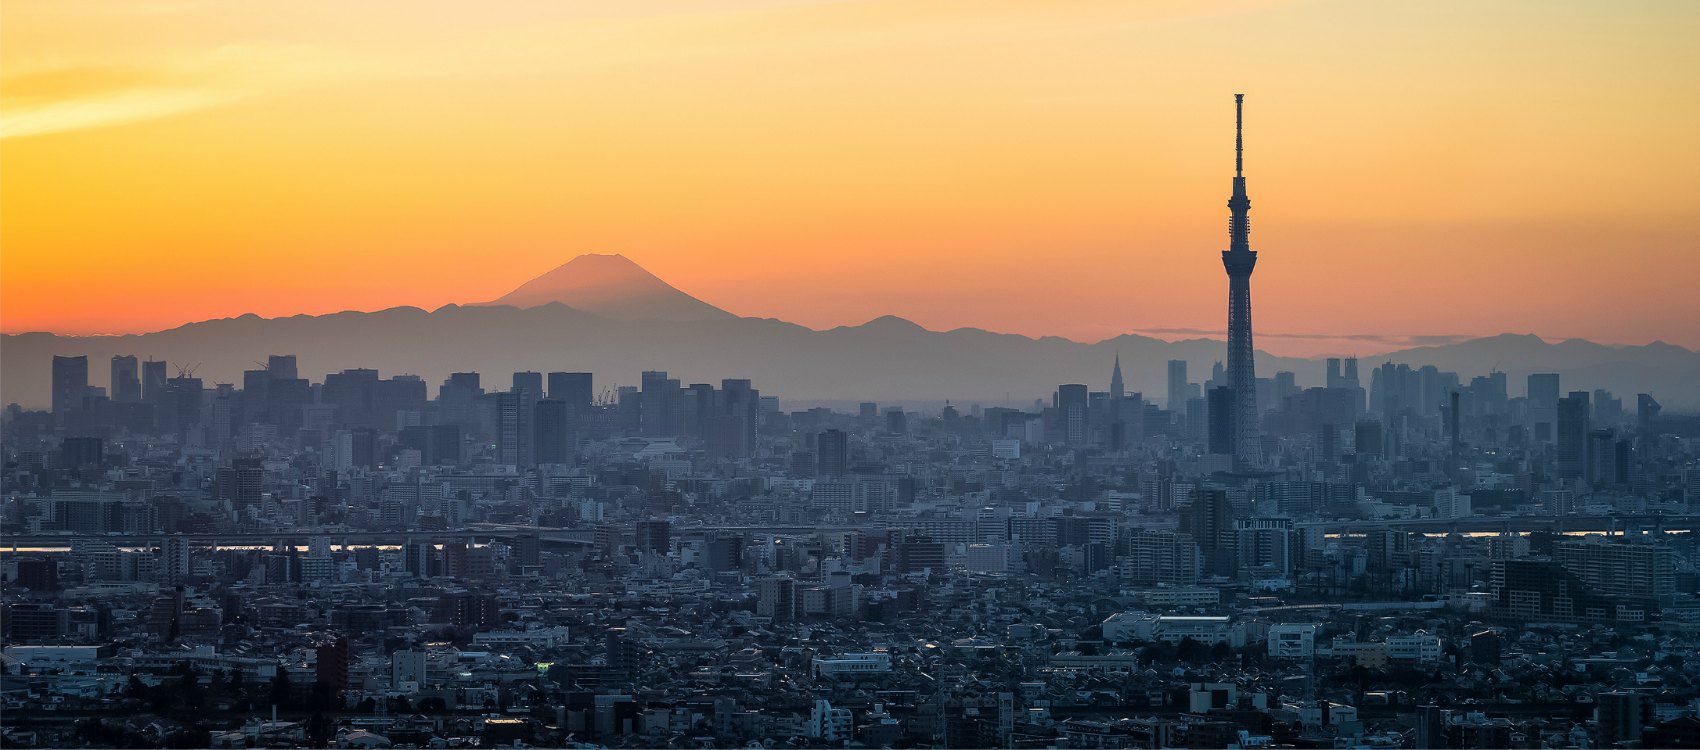 View of Tokyo city scape at dusk 